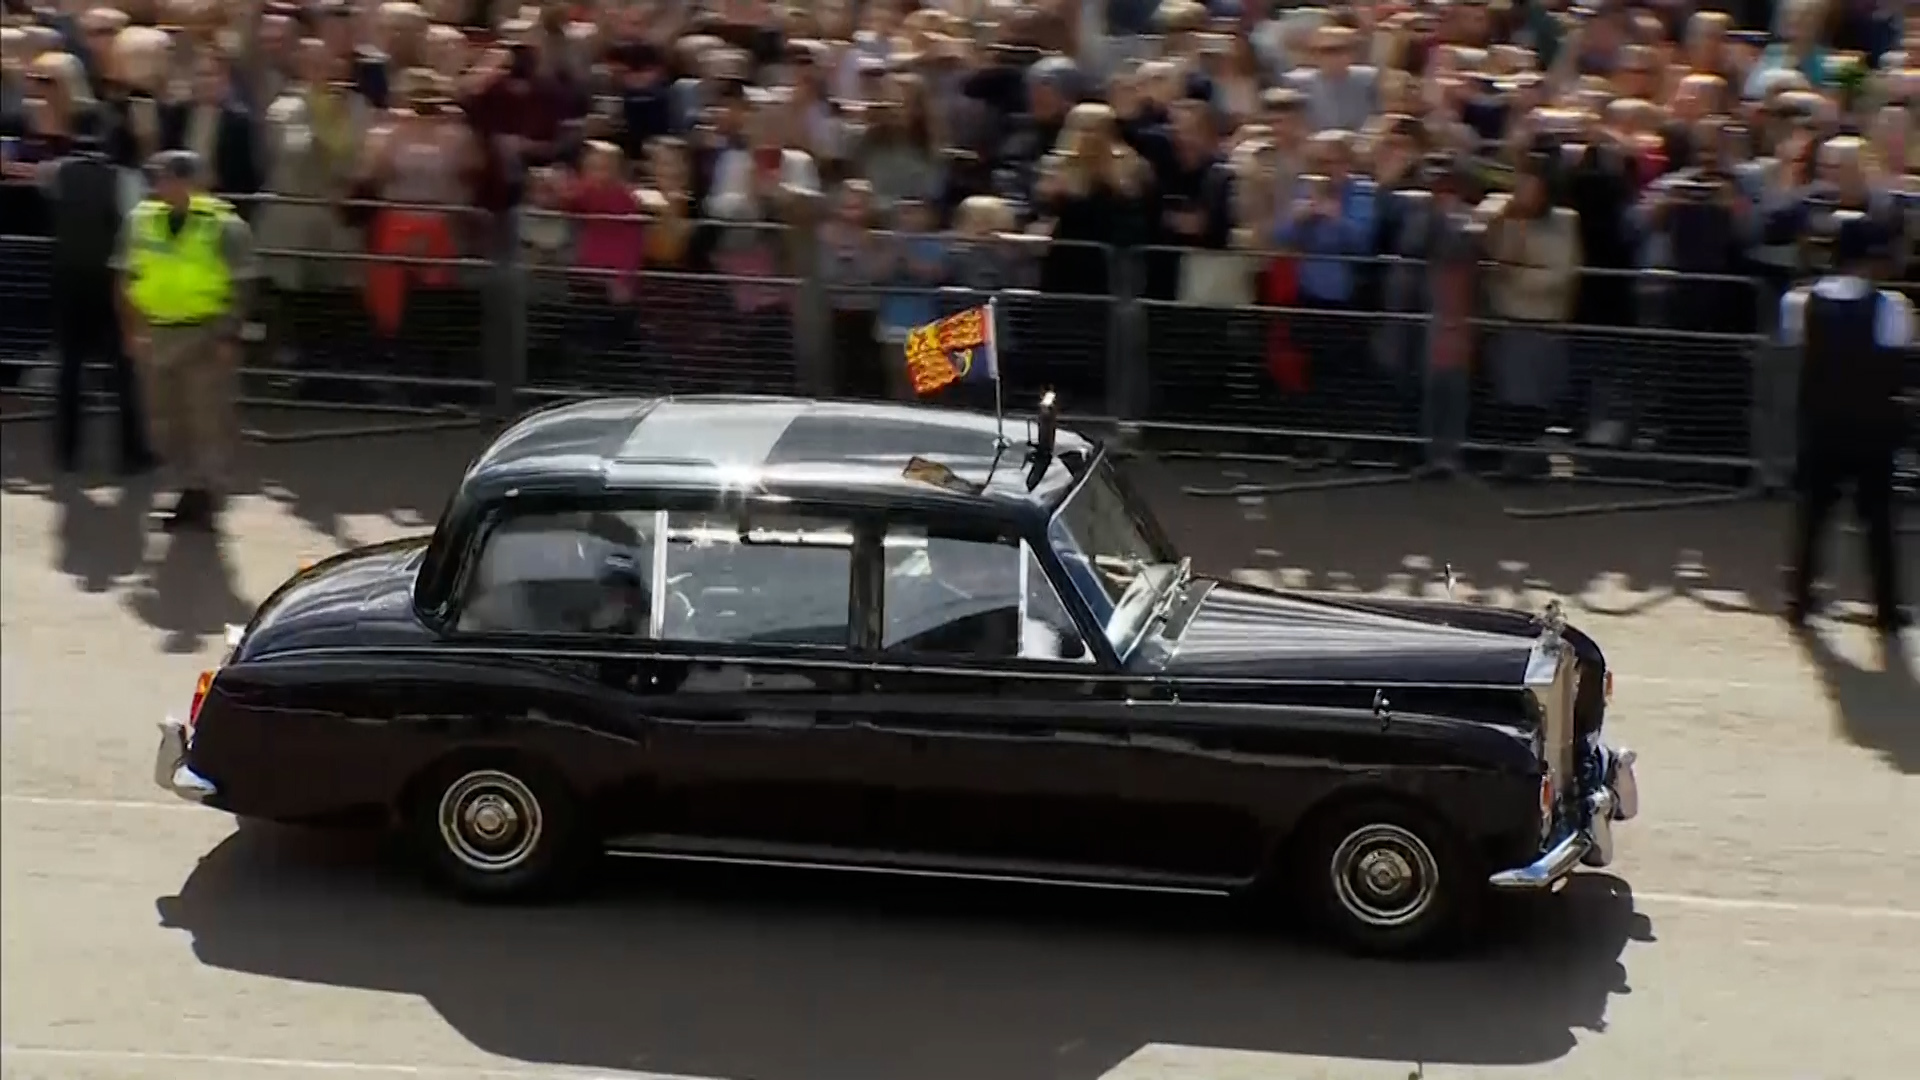 King Charles motorcade arrives at Buckingham Palace ahead of Queen's funeral